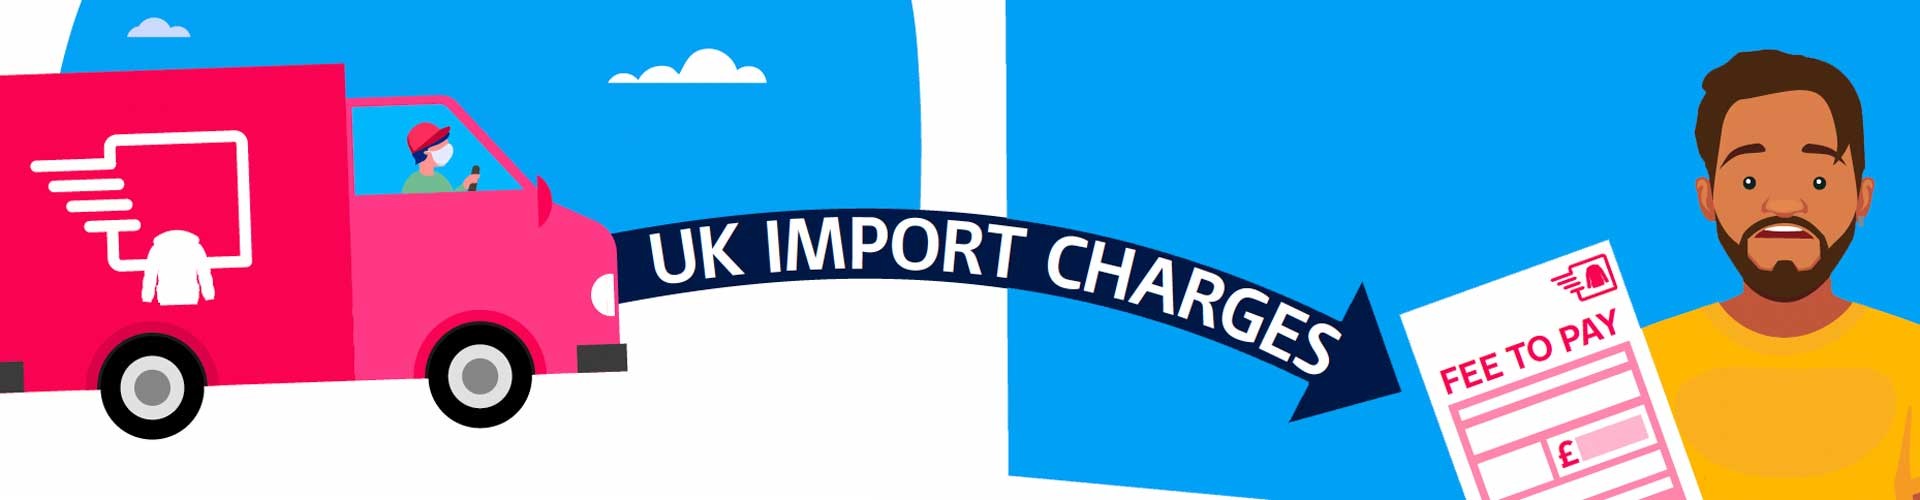 import charges